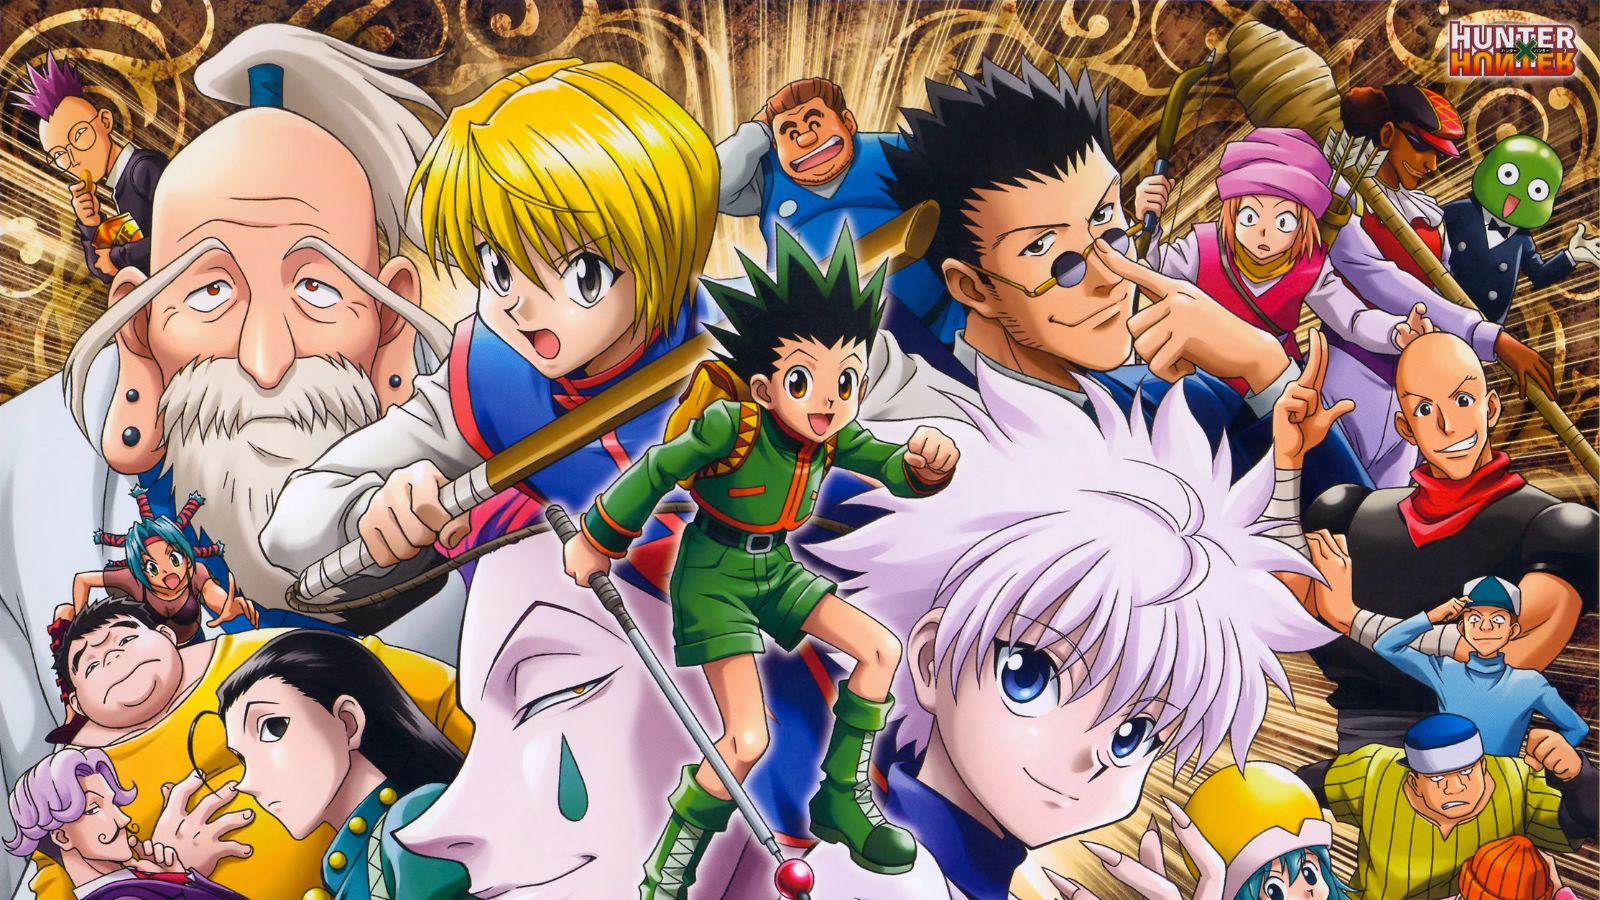 Breaking News: The Wait is Over! Hunter x Hunter Manga is Back on the Shelves After a Year